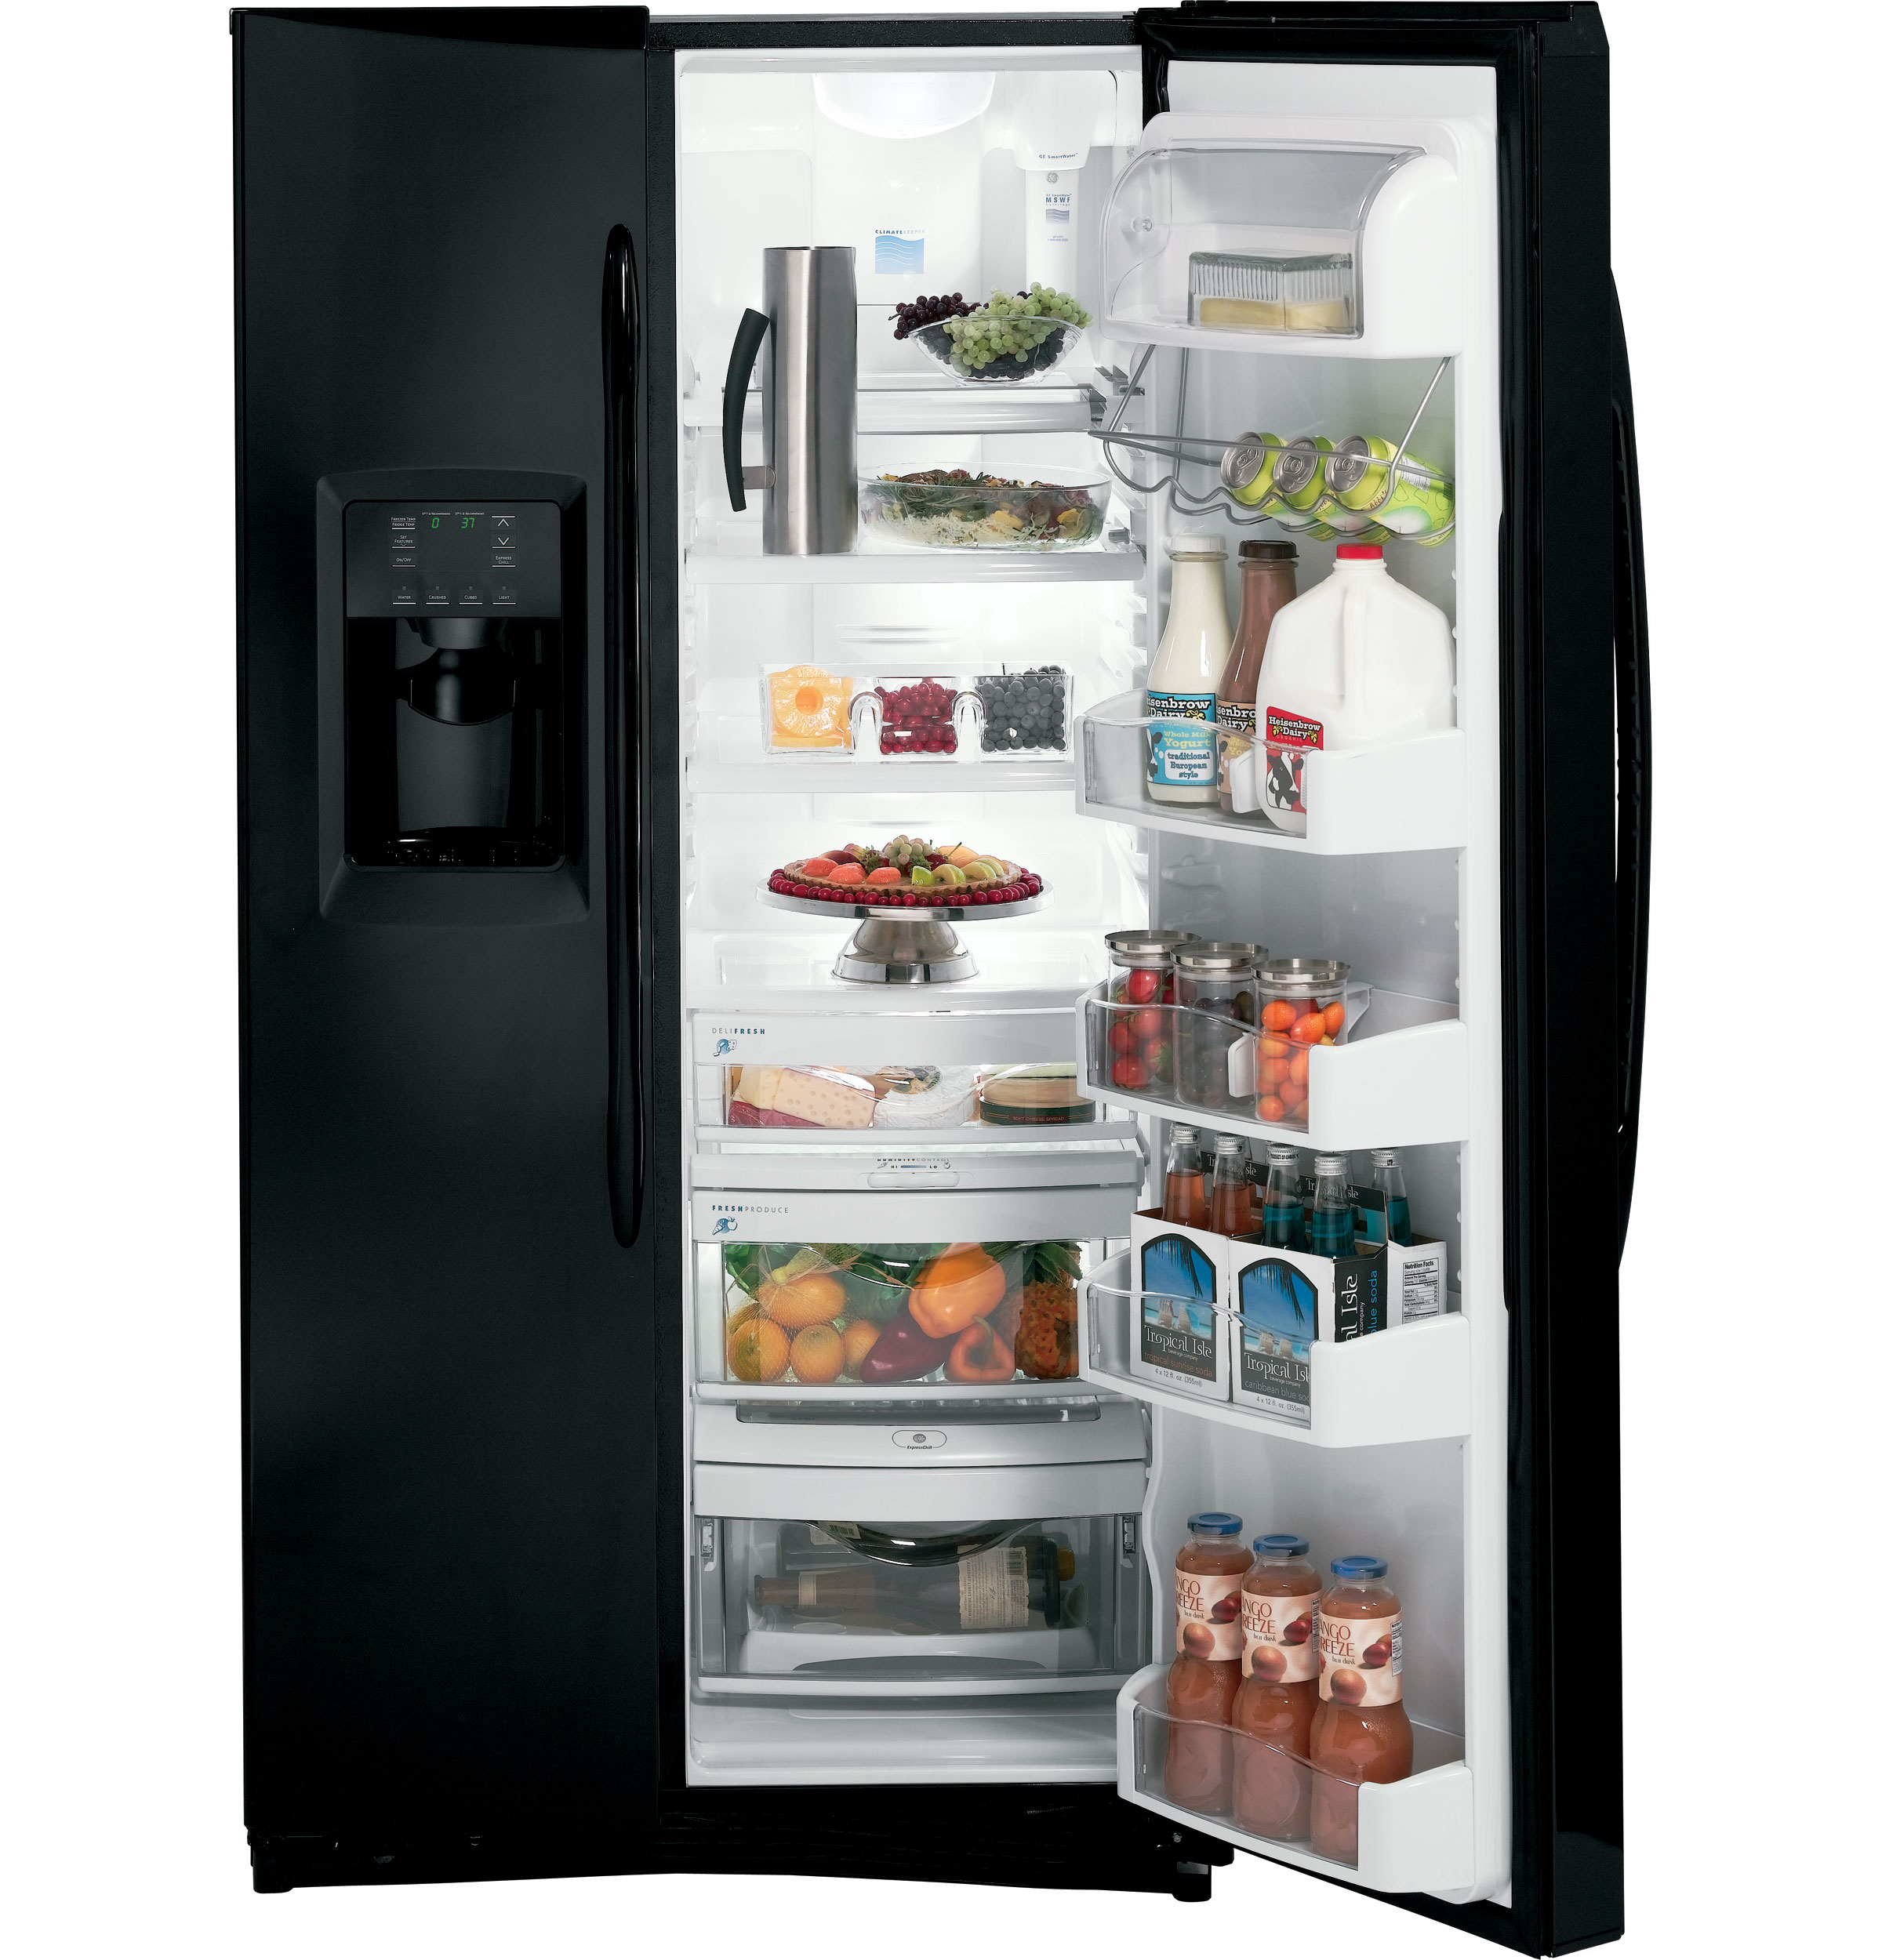 GE Profile™ ENERGY STAR® 25.6 Cu. Ft. Side-By-Side Refrigerator with Dispenser